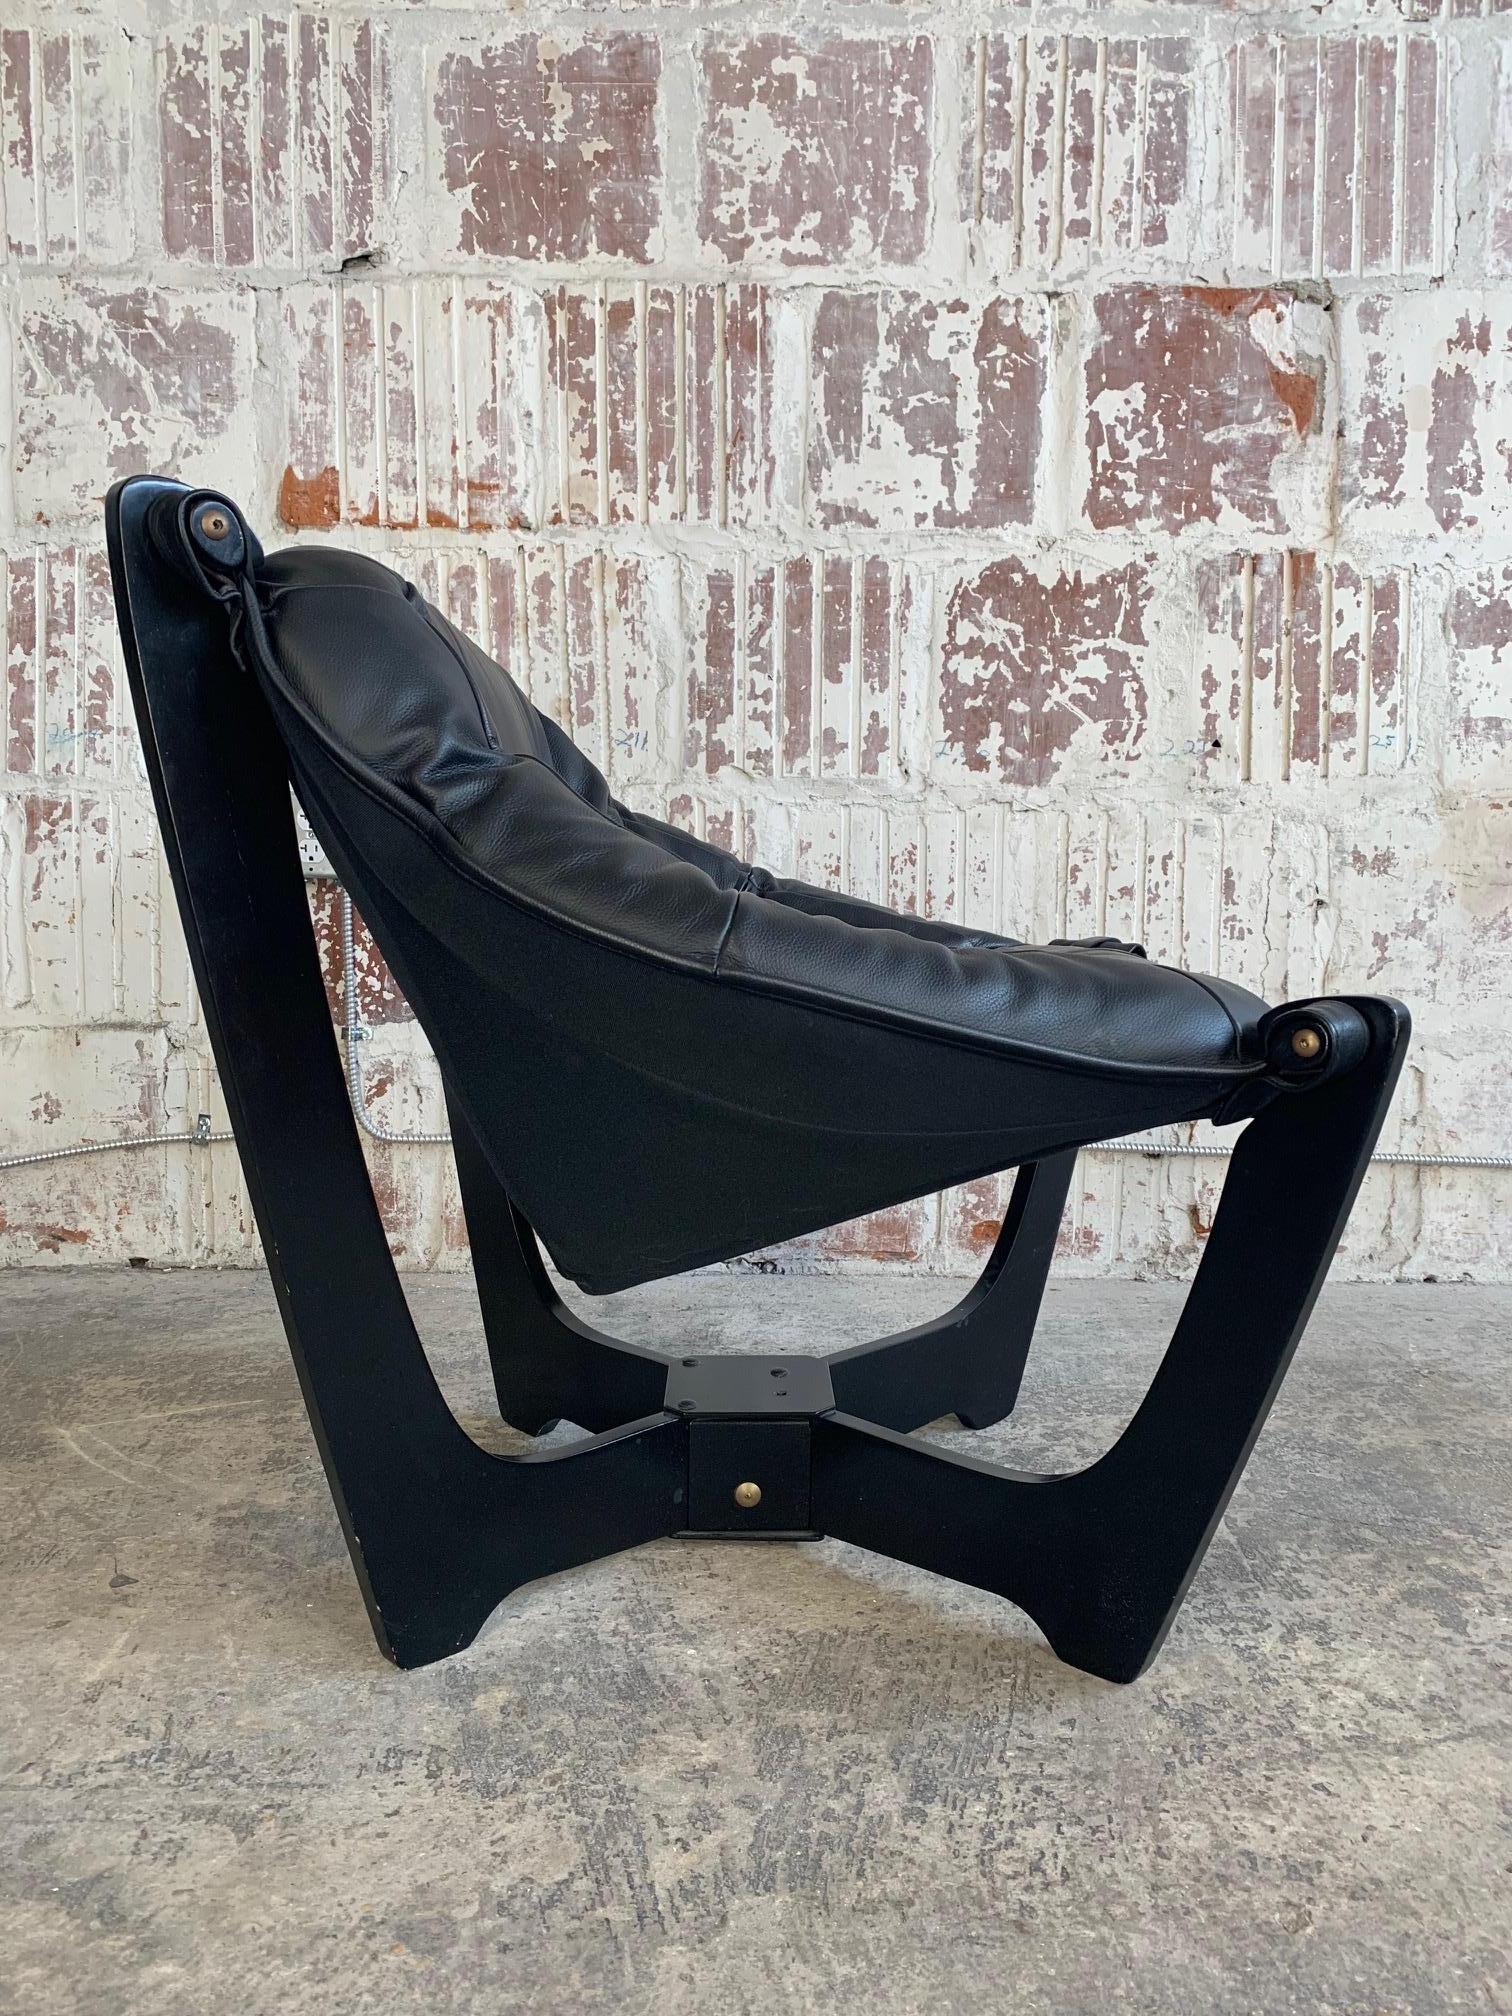 Iconic 'Luna' armchair by Odd Knutsen for Hjellegjerde. Black frame with black leather, circa 1970s. Very good condition.